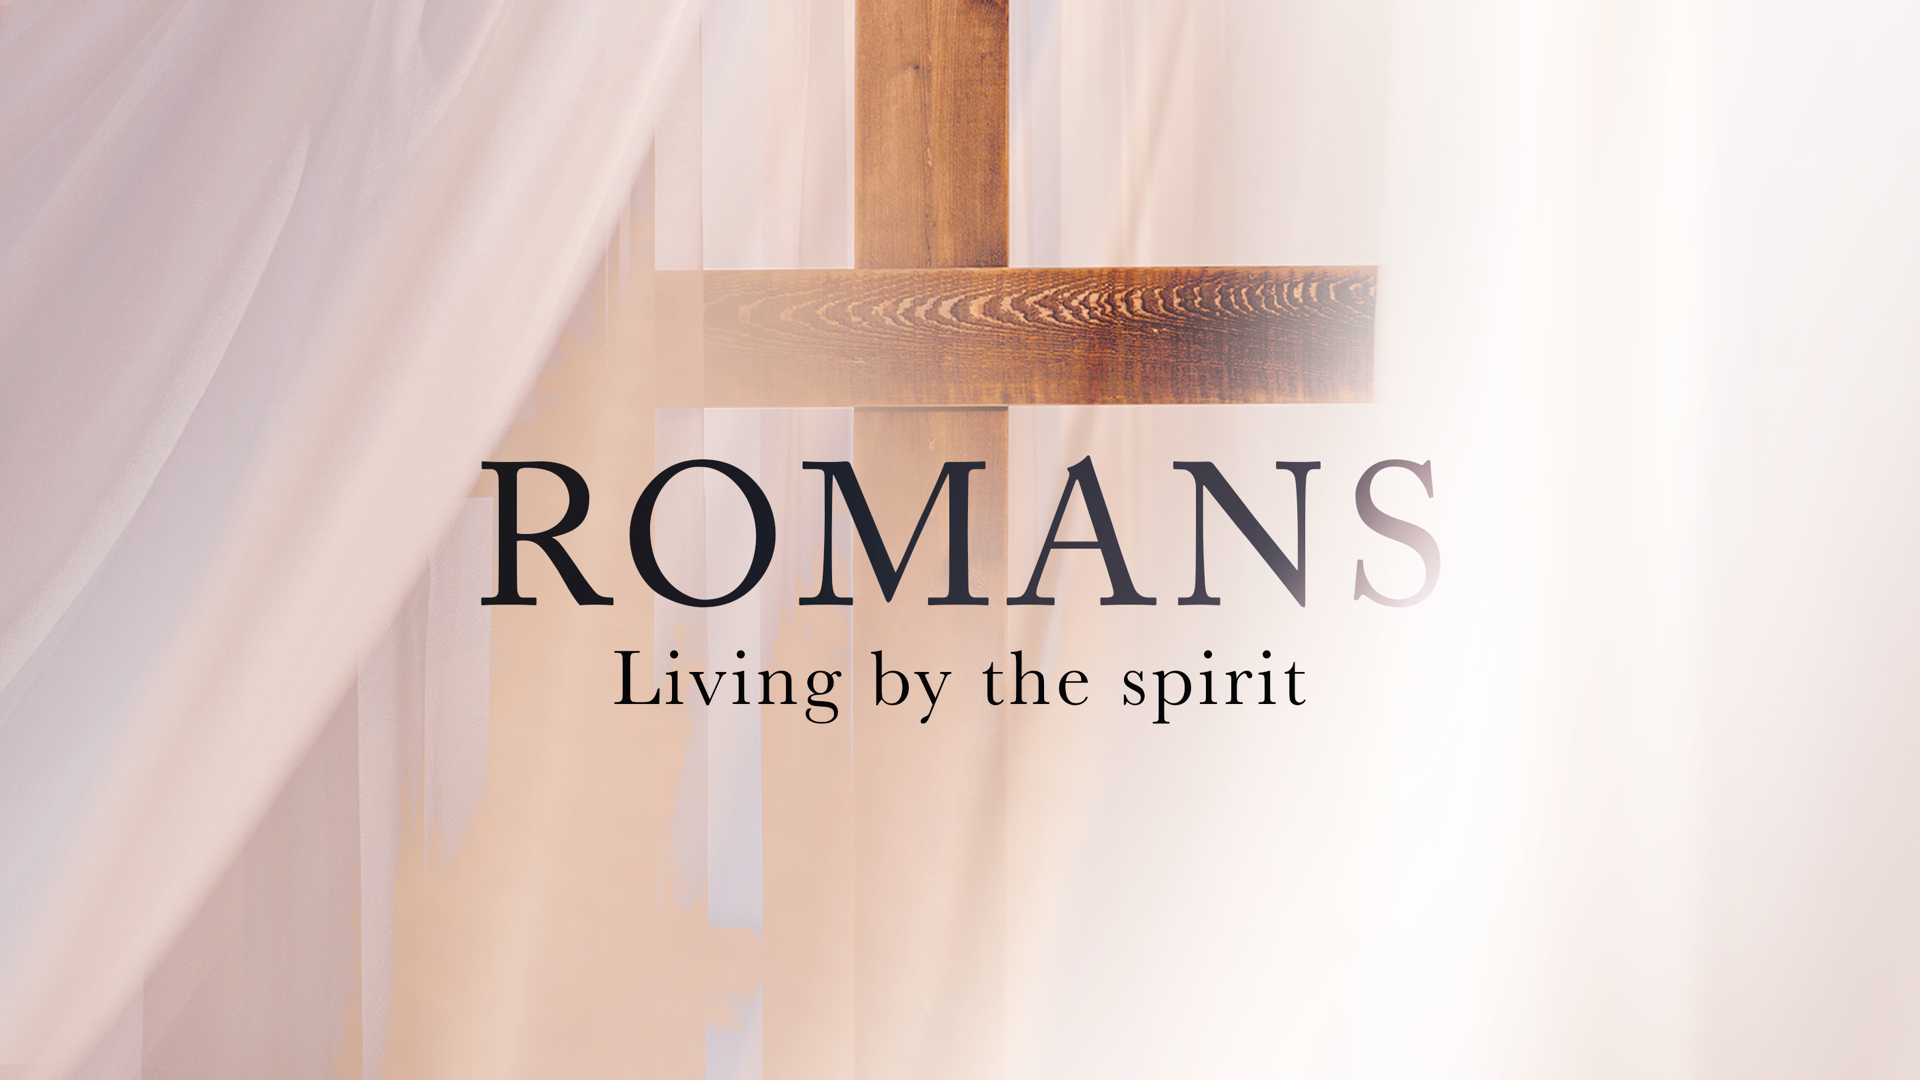 Practices of Living by the Spirit